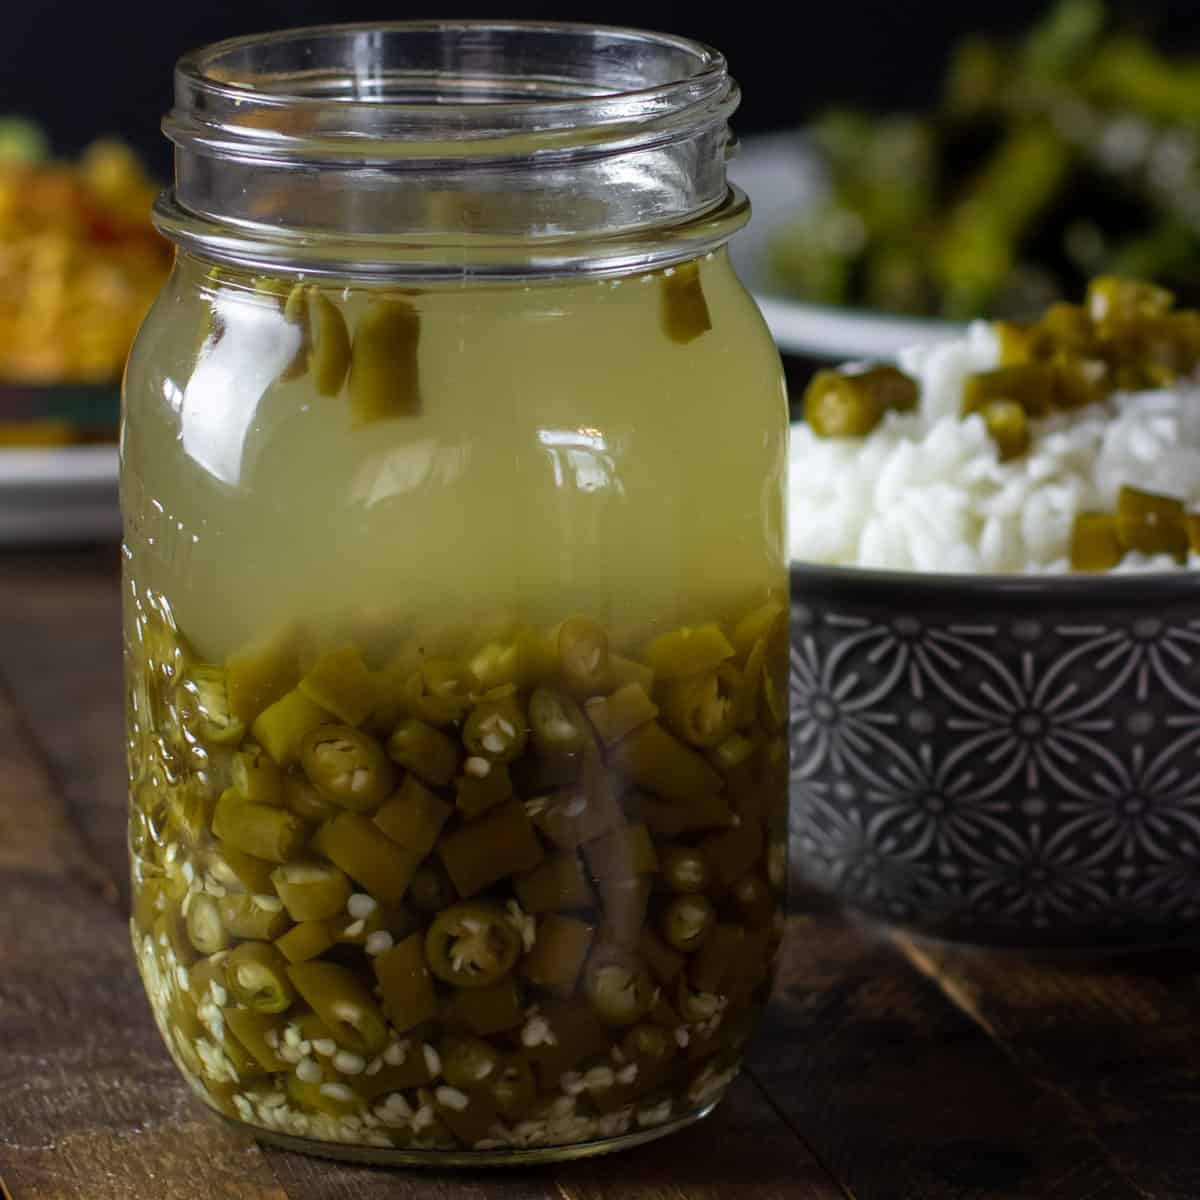 A jar of pickled green chillies in front of a bowl of rice.